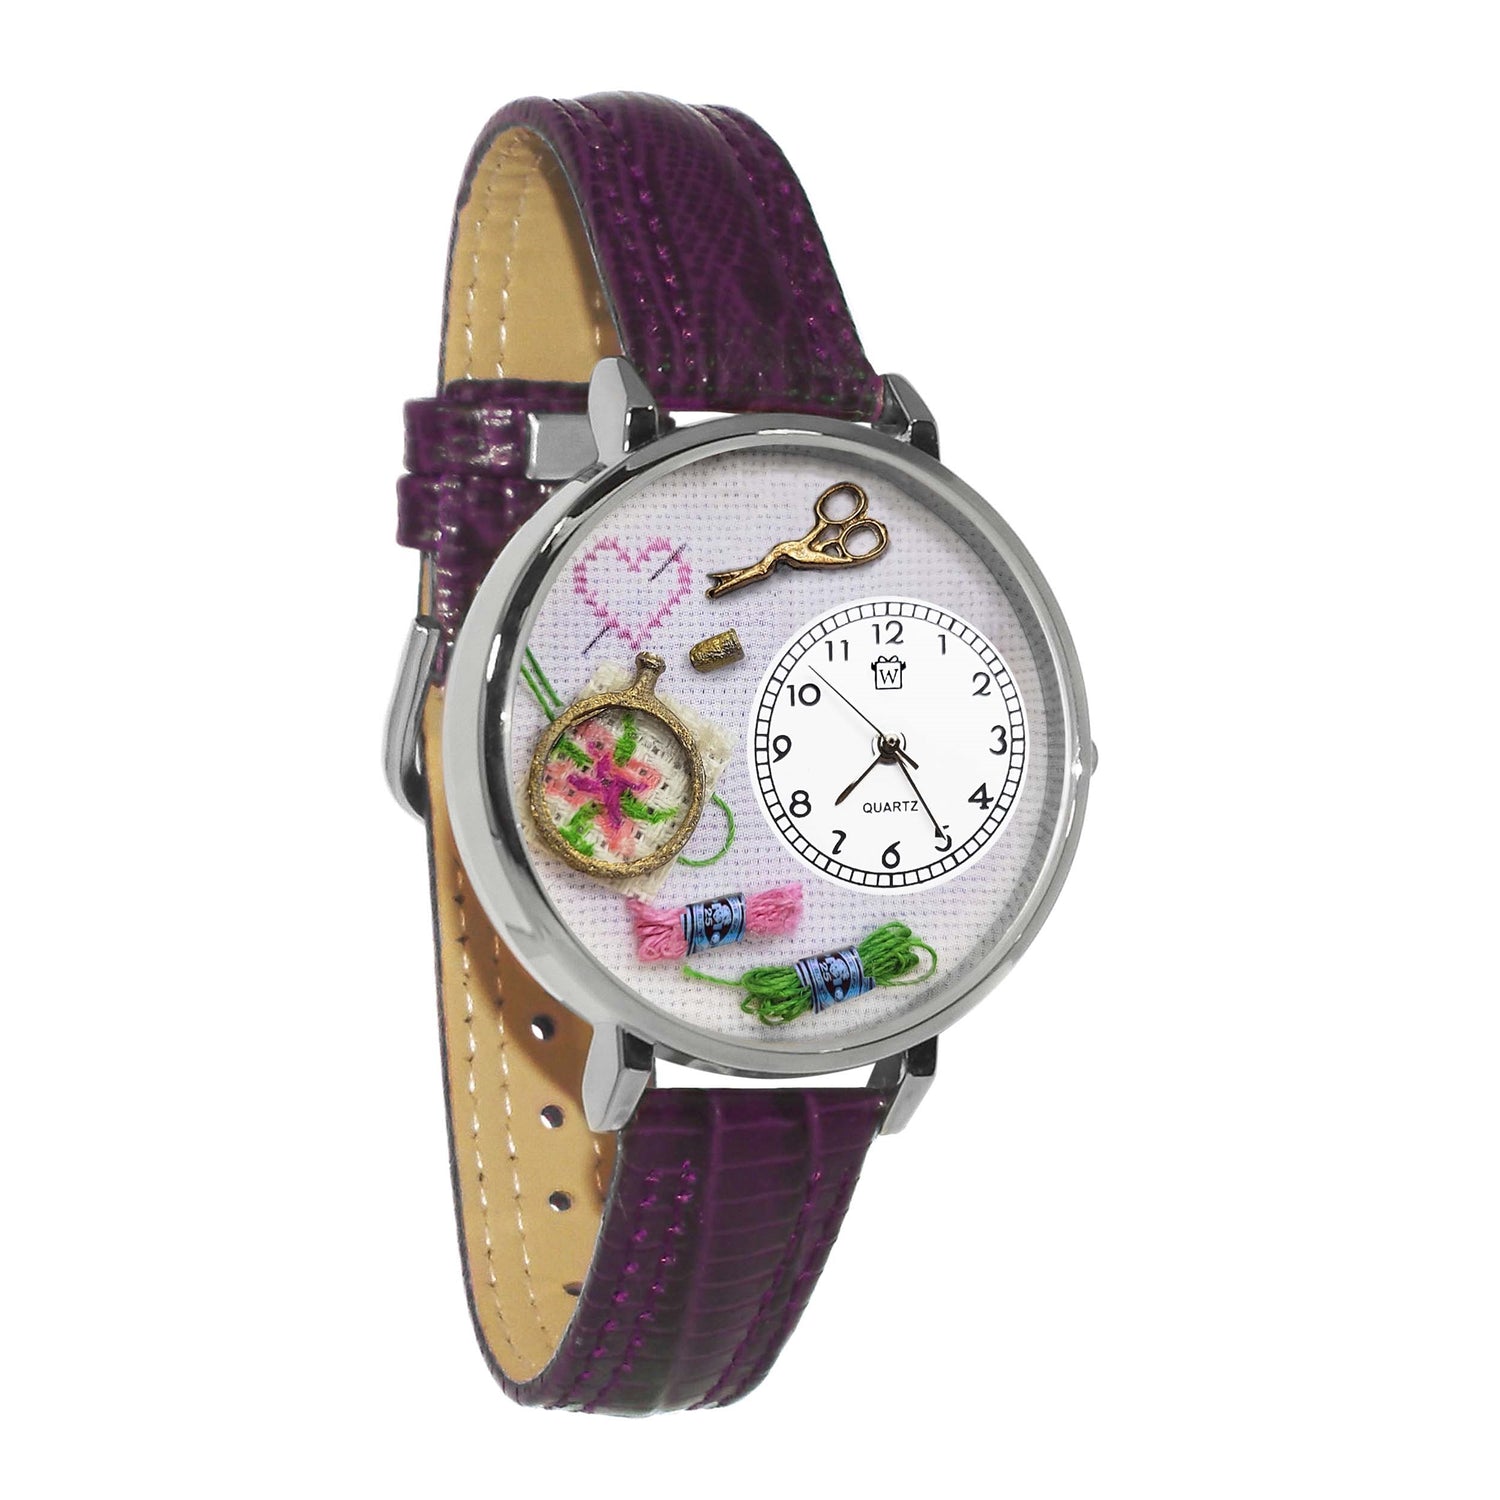 Whimsical Gifts | Cross Stitch 3D Watch Large Style | Handmade in USA | Hobbies & Special Interests | Sewing & Crafting | Novelty Unique Fun Miniatures Gift | Silver Finish Purple Leather Watch Band